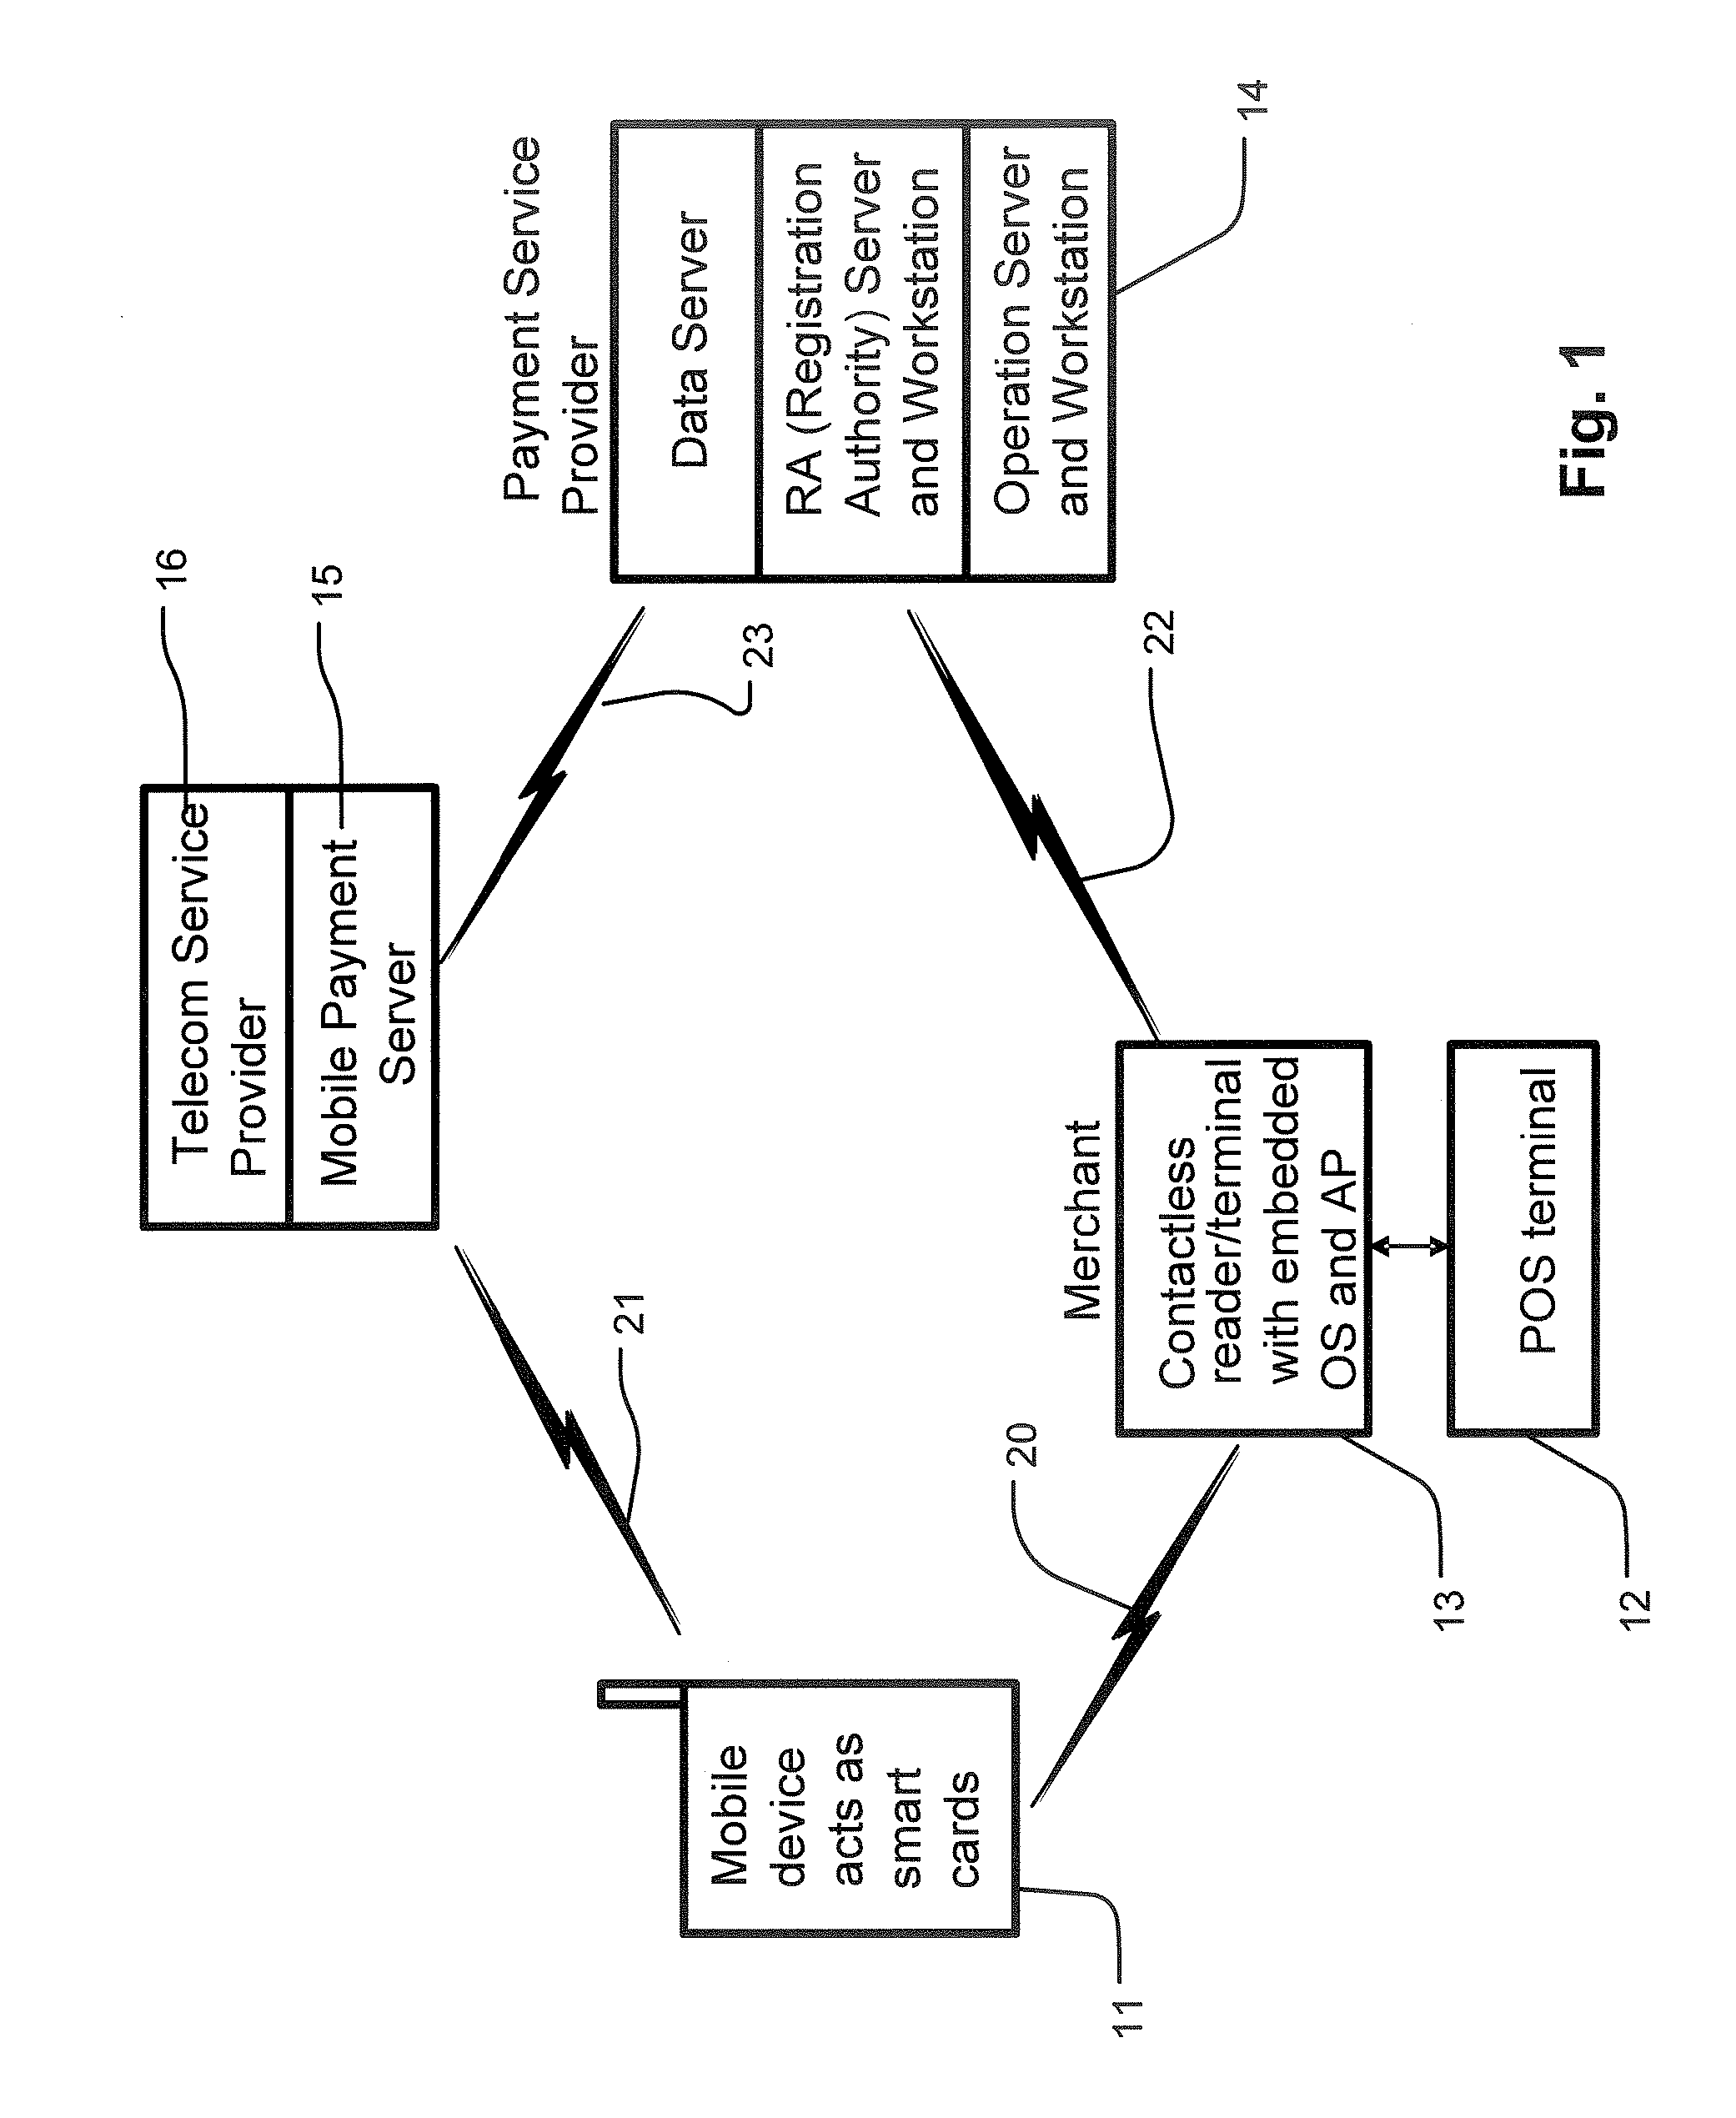 System and Method of Managing Contactless Payment Transactions Using a Mobile Communication Device As A Stored Value Device